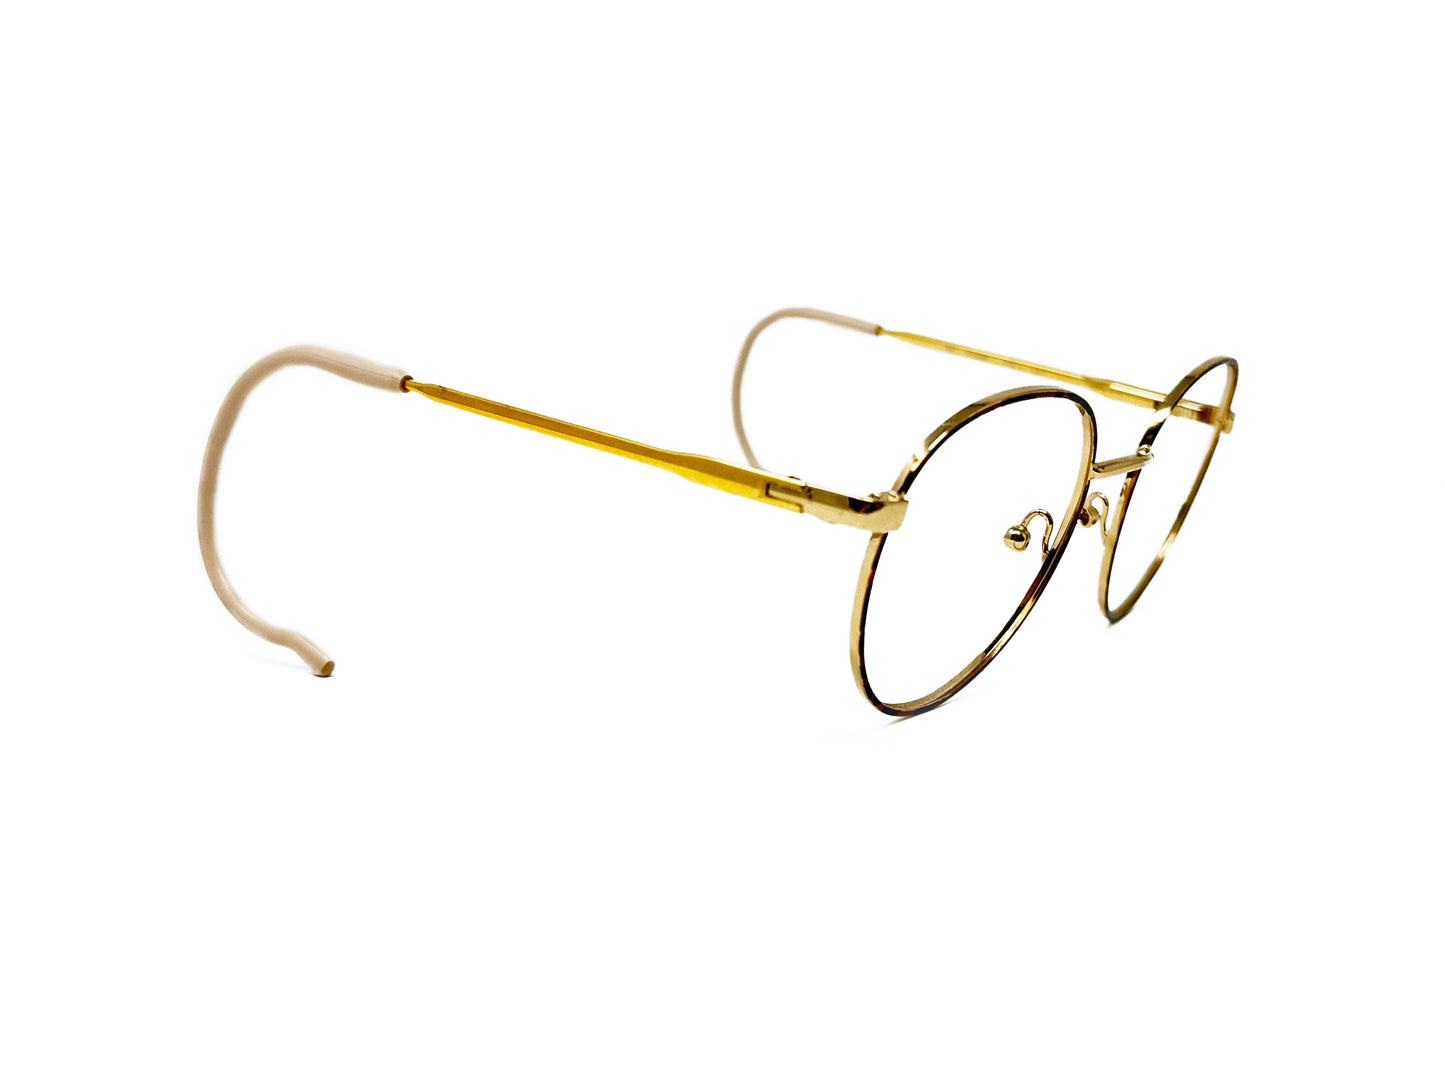 Berdel Sferoflex metal pantos optical frame. Model: Pantos. Color: GEP - Gold metal with tortoise trim and cable temples  Side view.